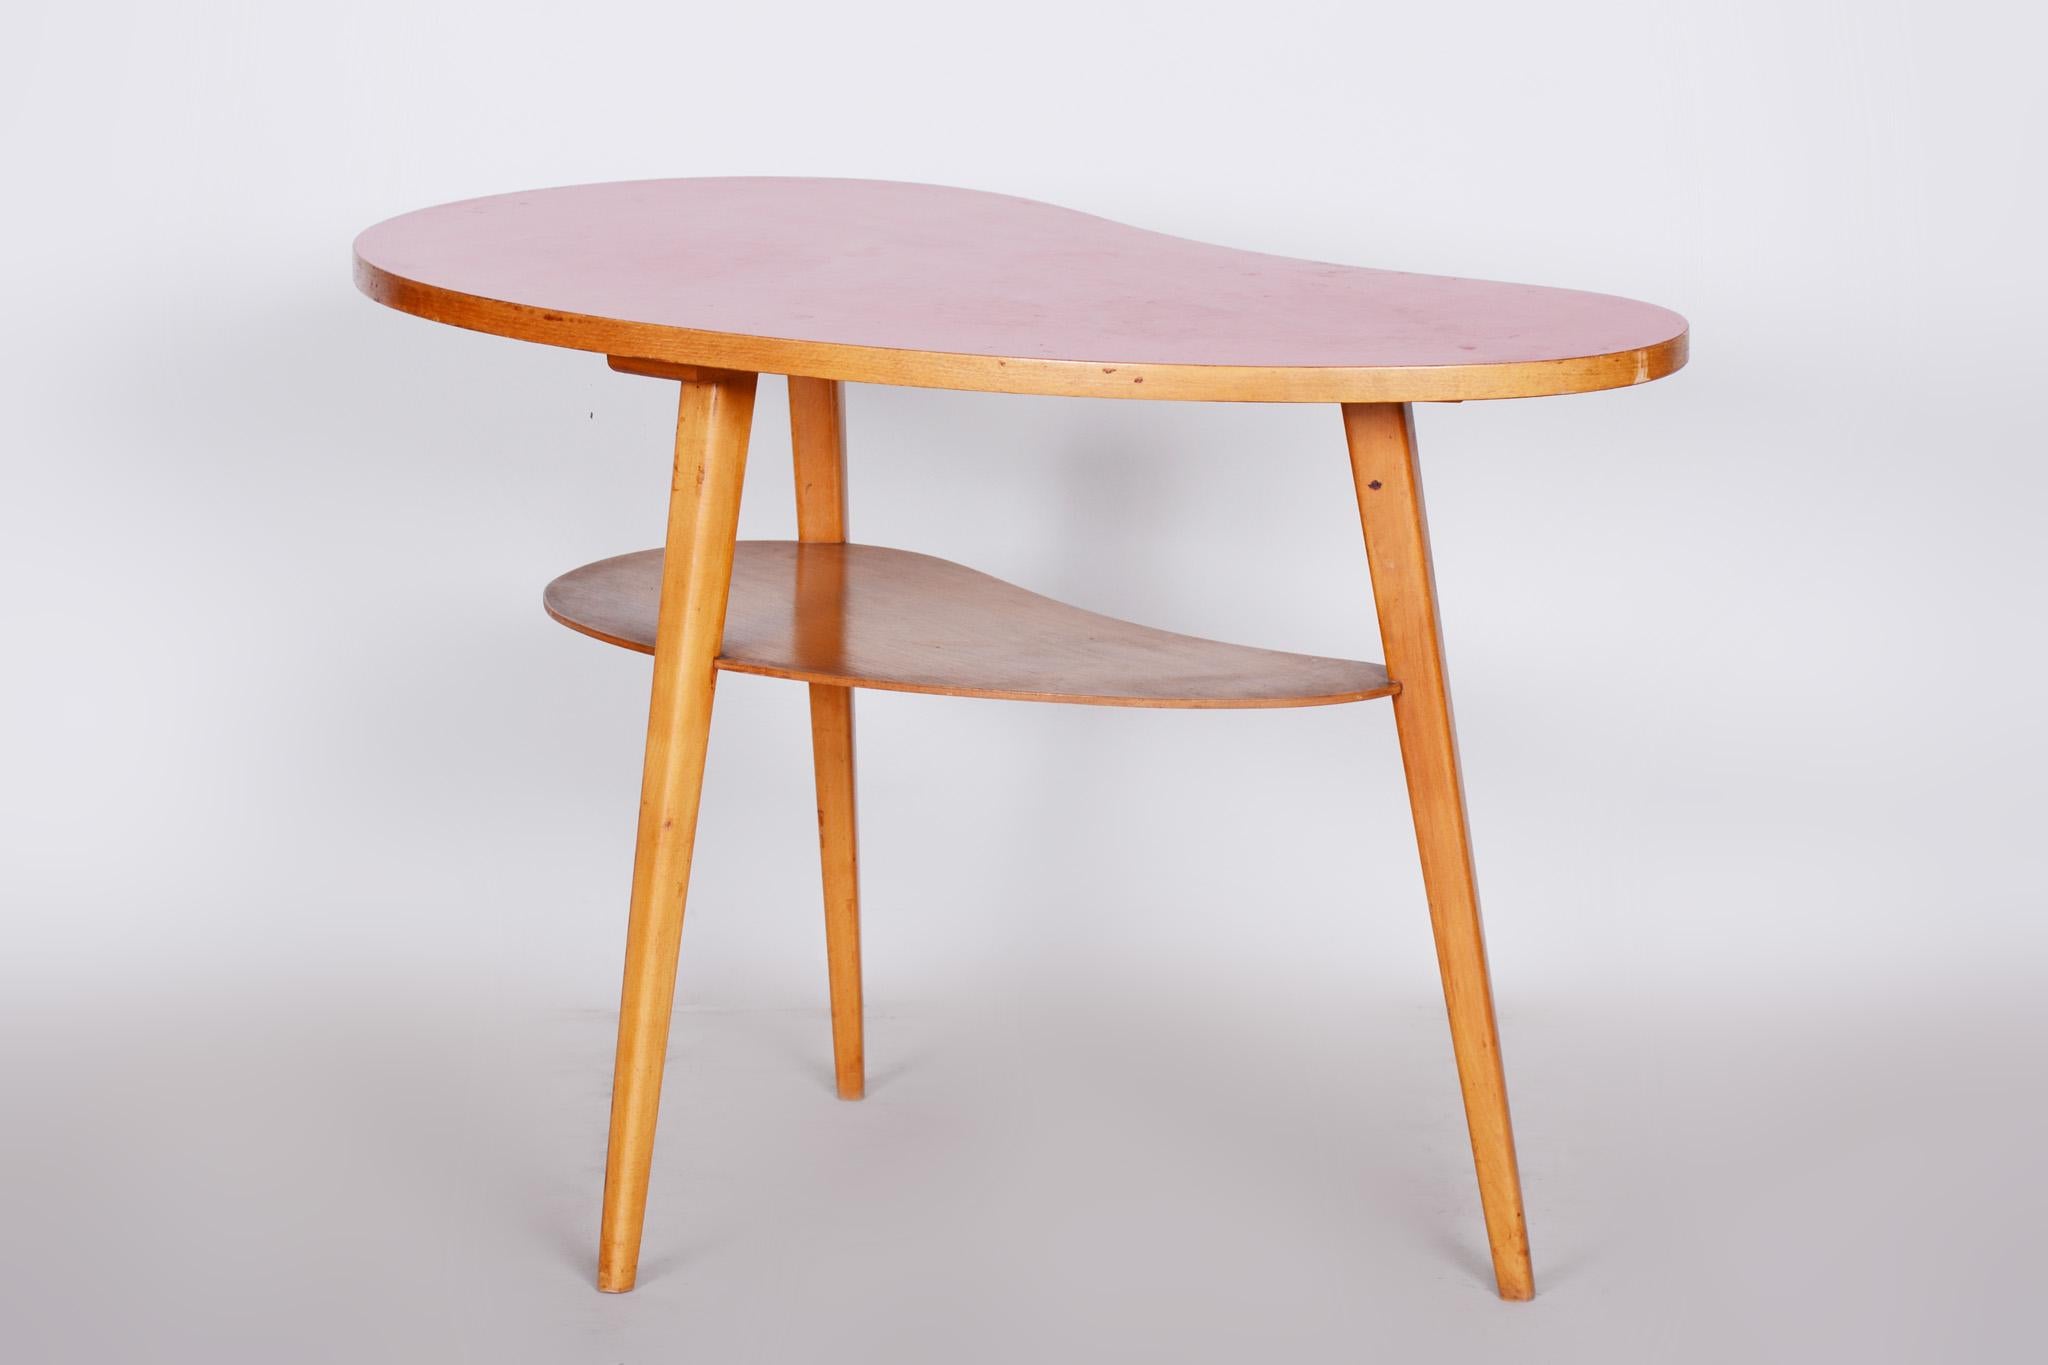 Small Beech Table, Czech Midcentury, Preserved in Original Condition, 1950s In Good Condition For Sale In Horomerice, CZ